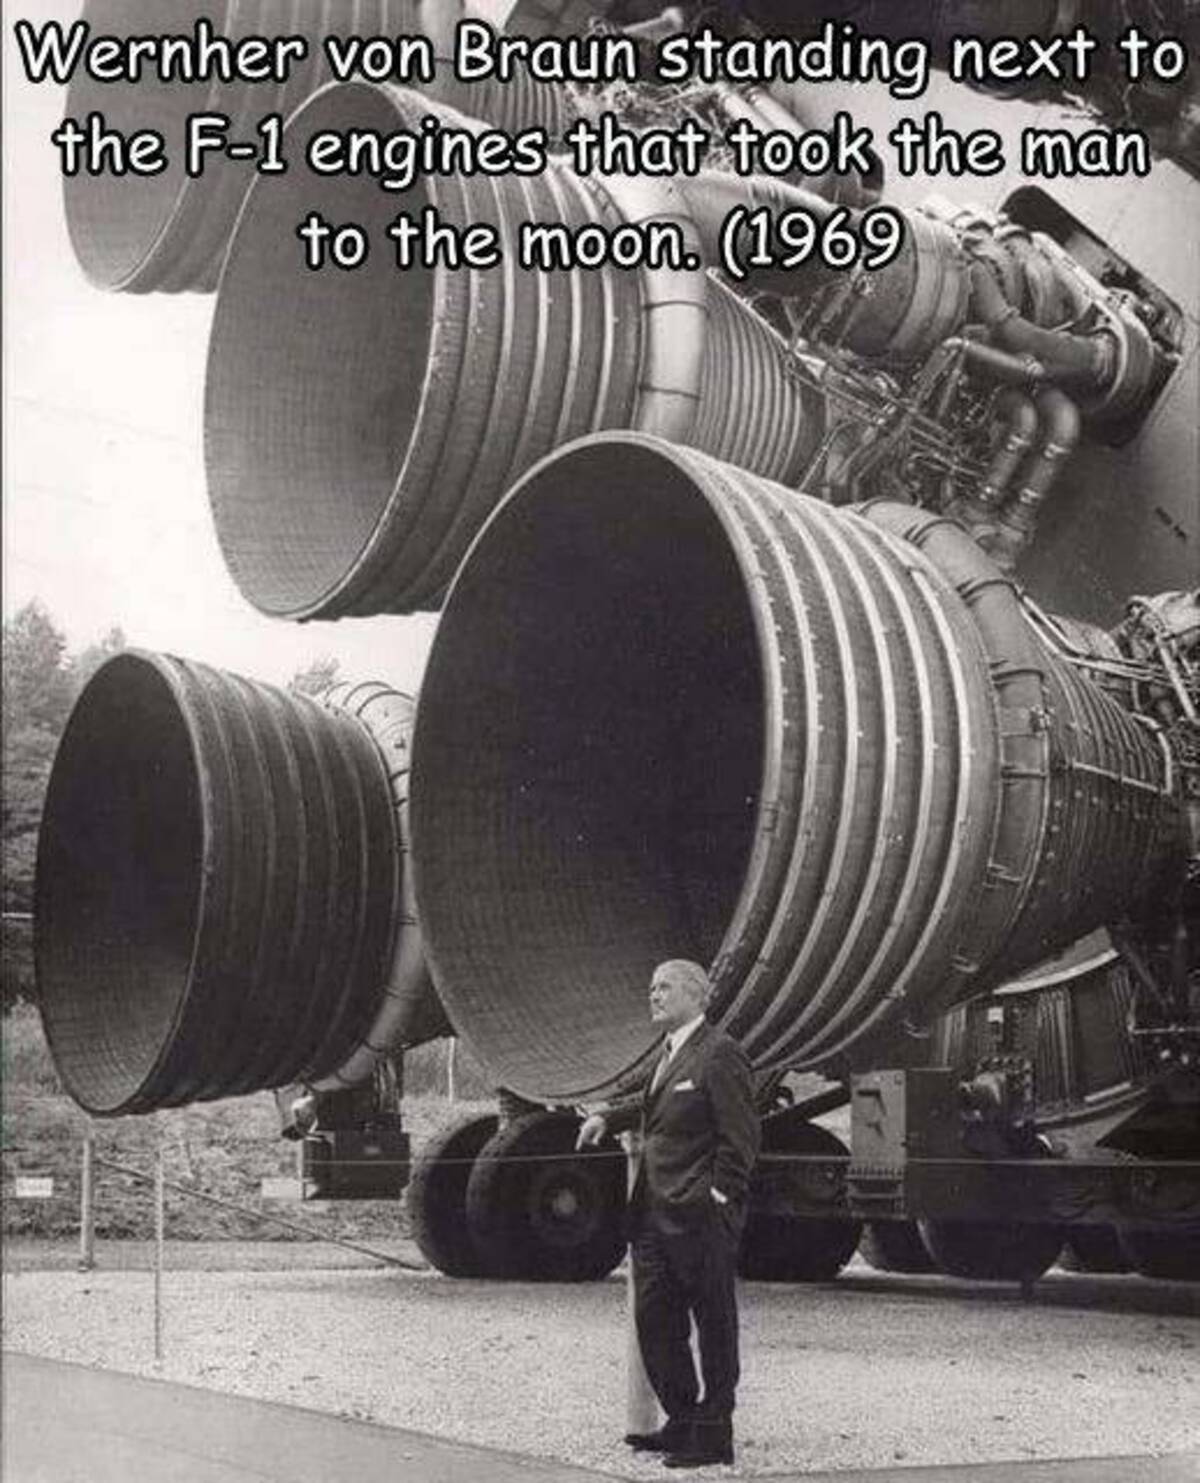 megalophobia rocket - Wernher von Braun standing next to the F1 engines that took the man to the moon. 1969